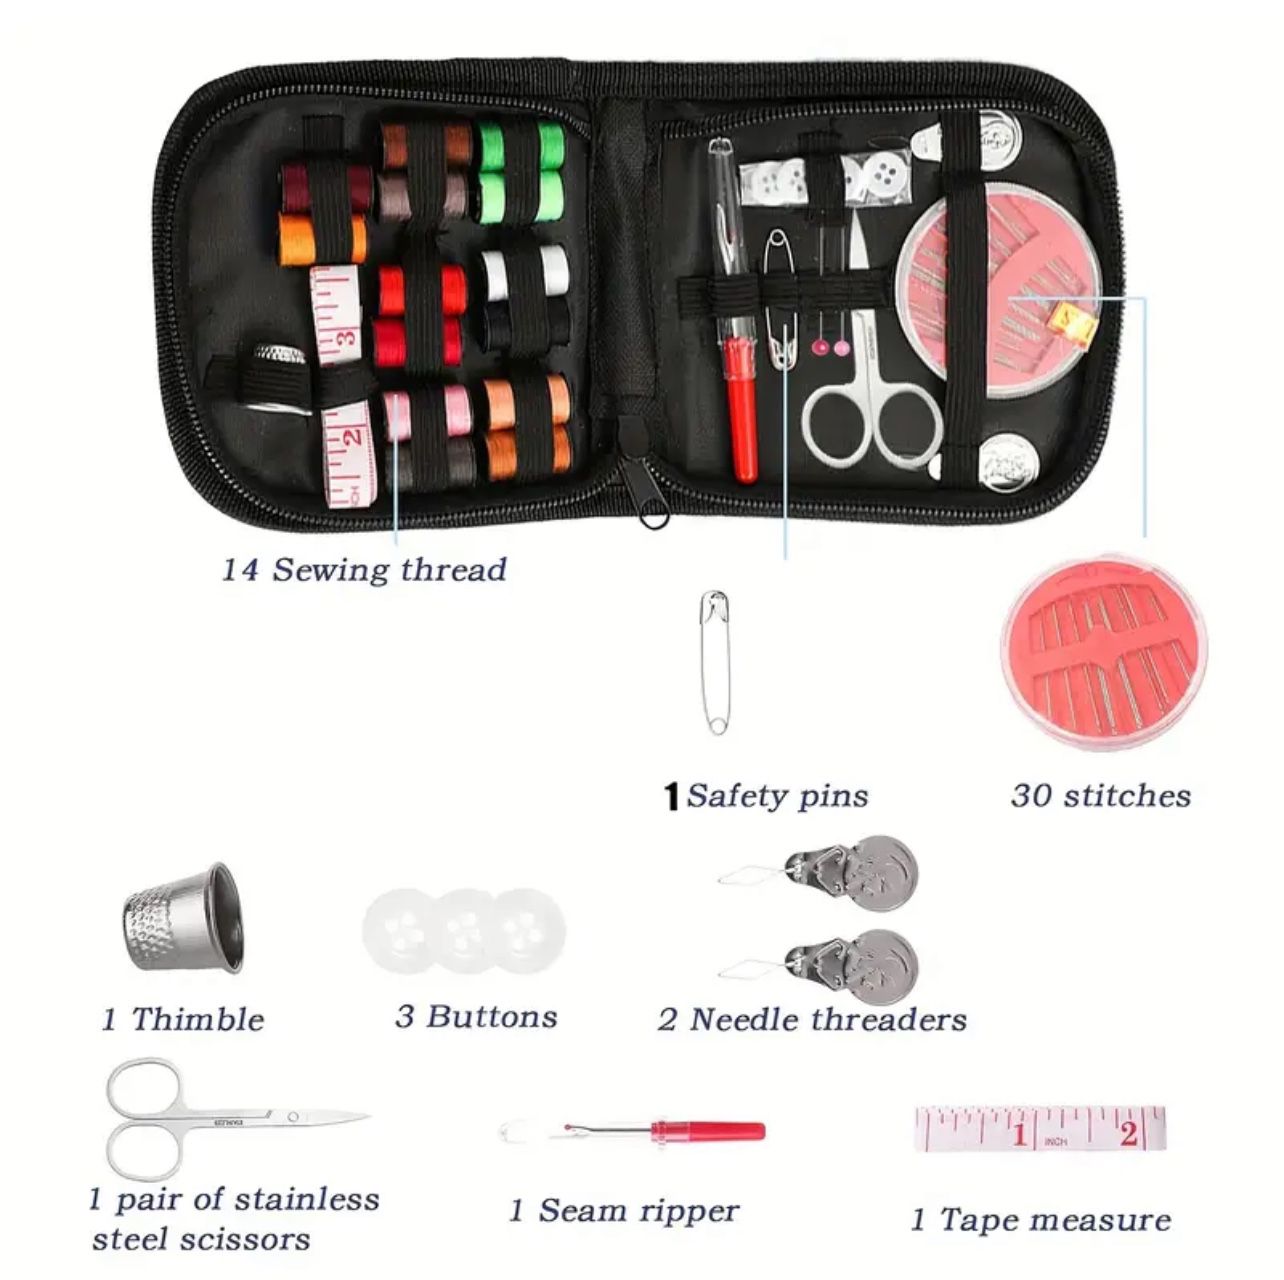 All-in-One Black Sewing Kit - 54 Pieces, 14 Threads for Emergency Repairs, Trave